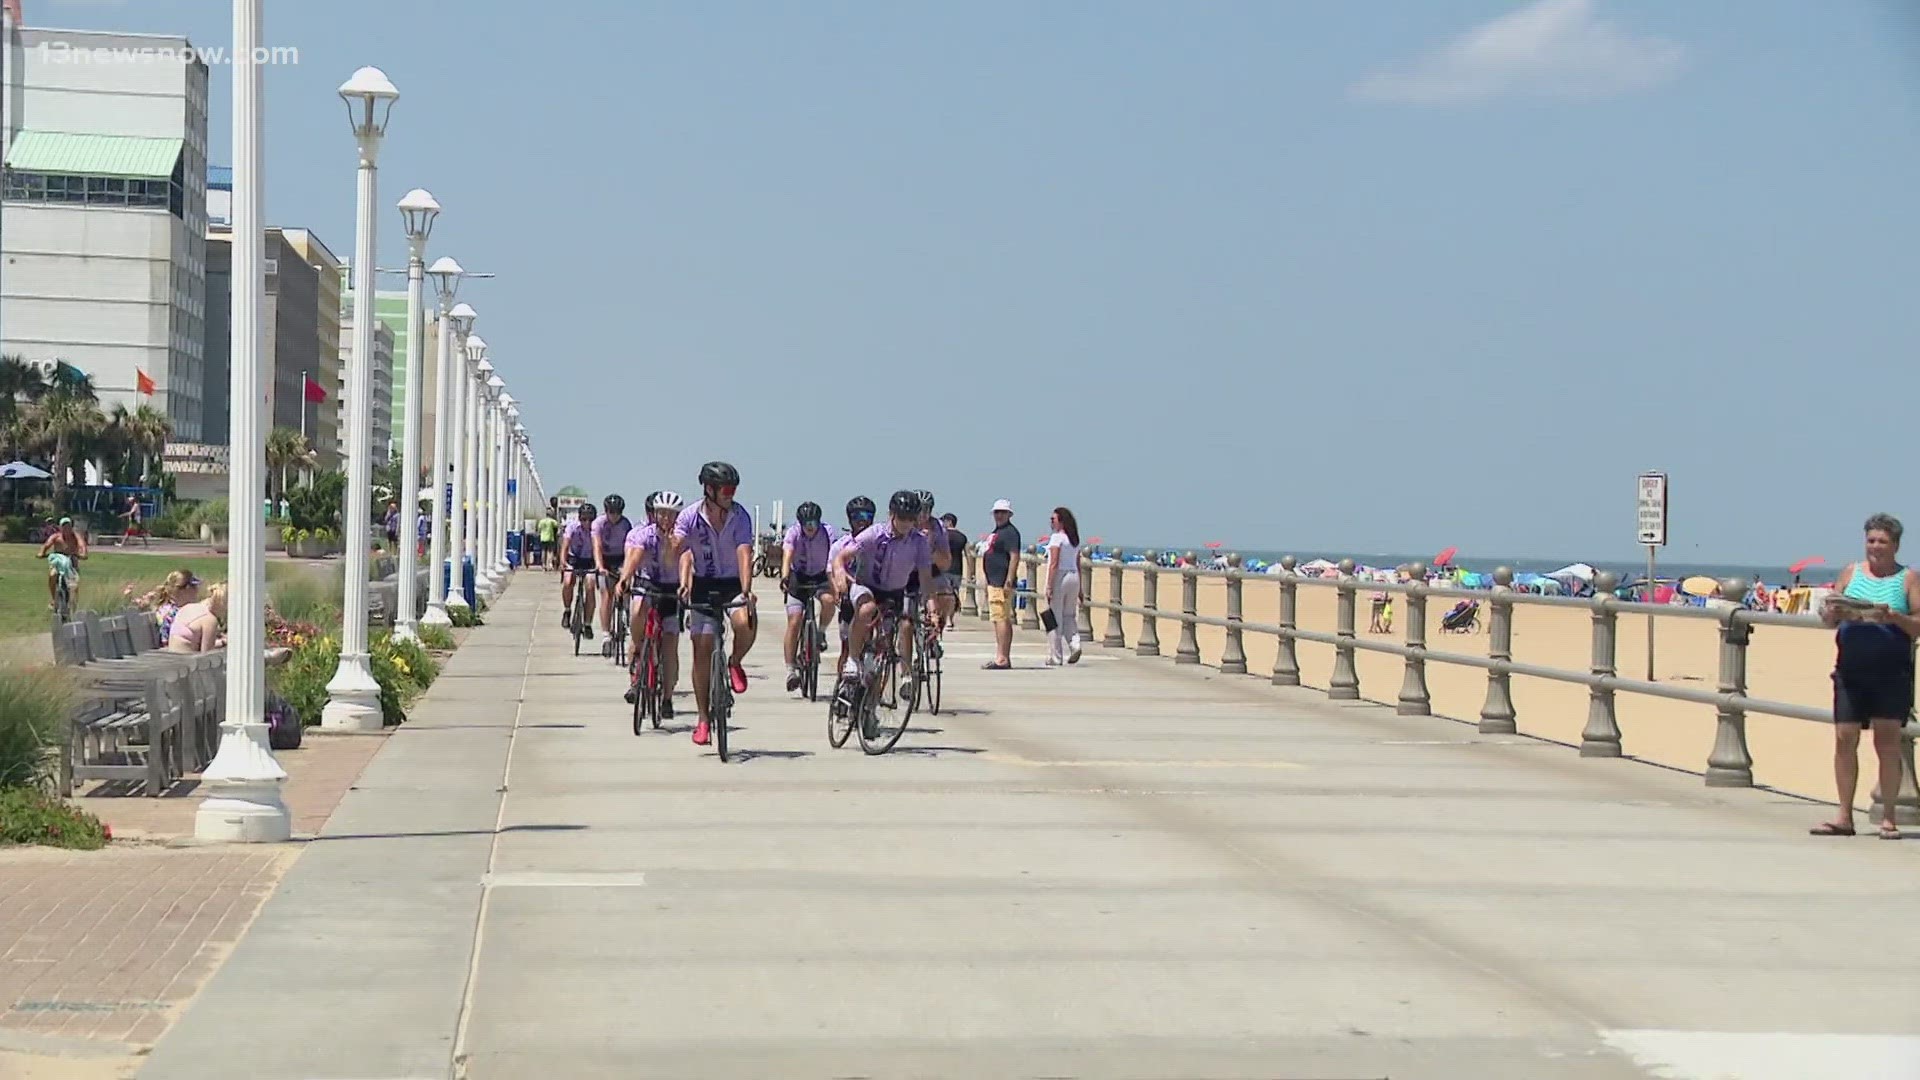 Since 2010, members of Phi Gamma Delta Fraternity at Western Kentucky University hold this coast-to-coast charity bike ride to benefit Alzheimer's research.